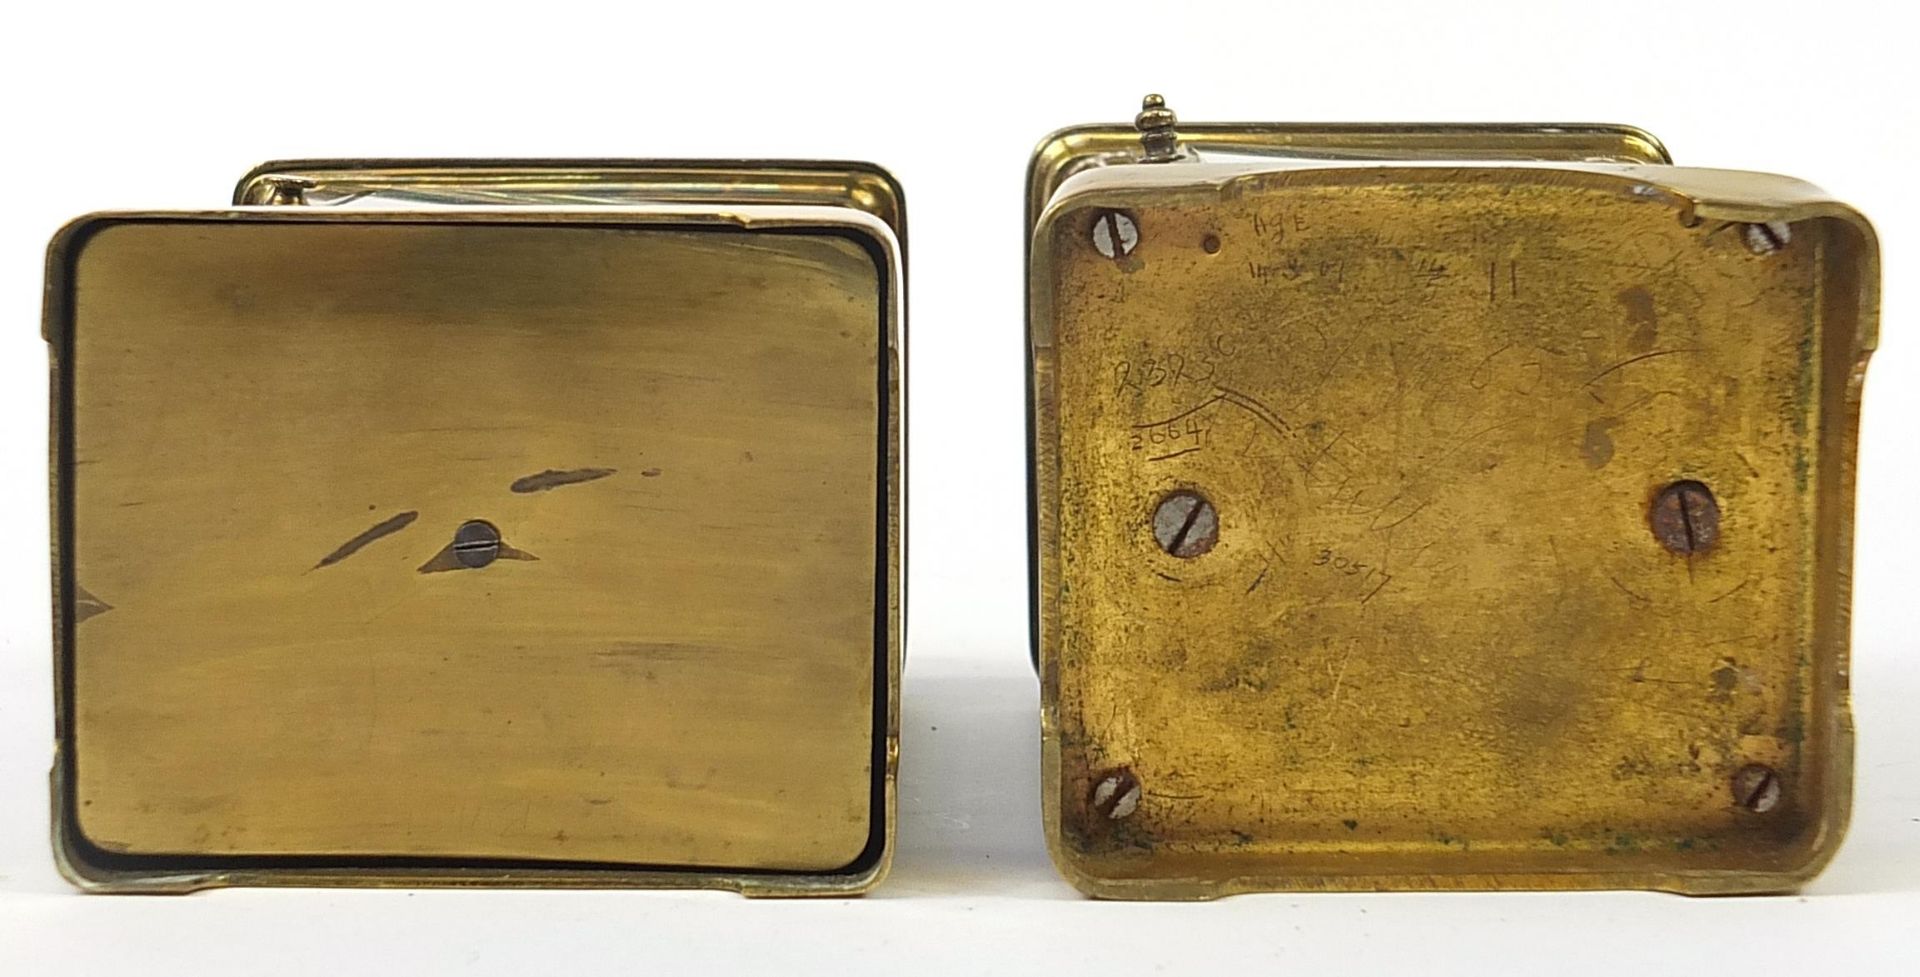 Two brass cased carriage clocks with enamel dials, each approximately 11cm high Both clocks wind and - Image 4 of 4